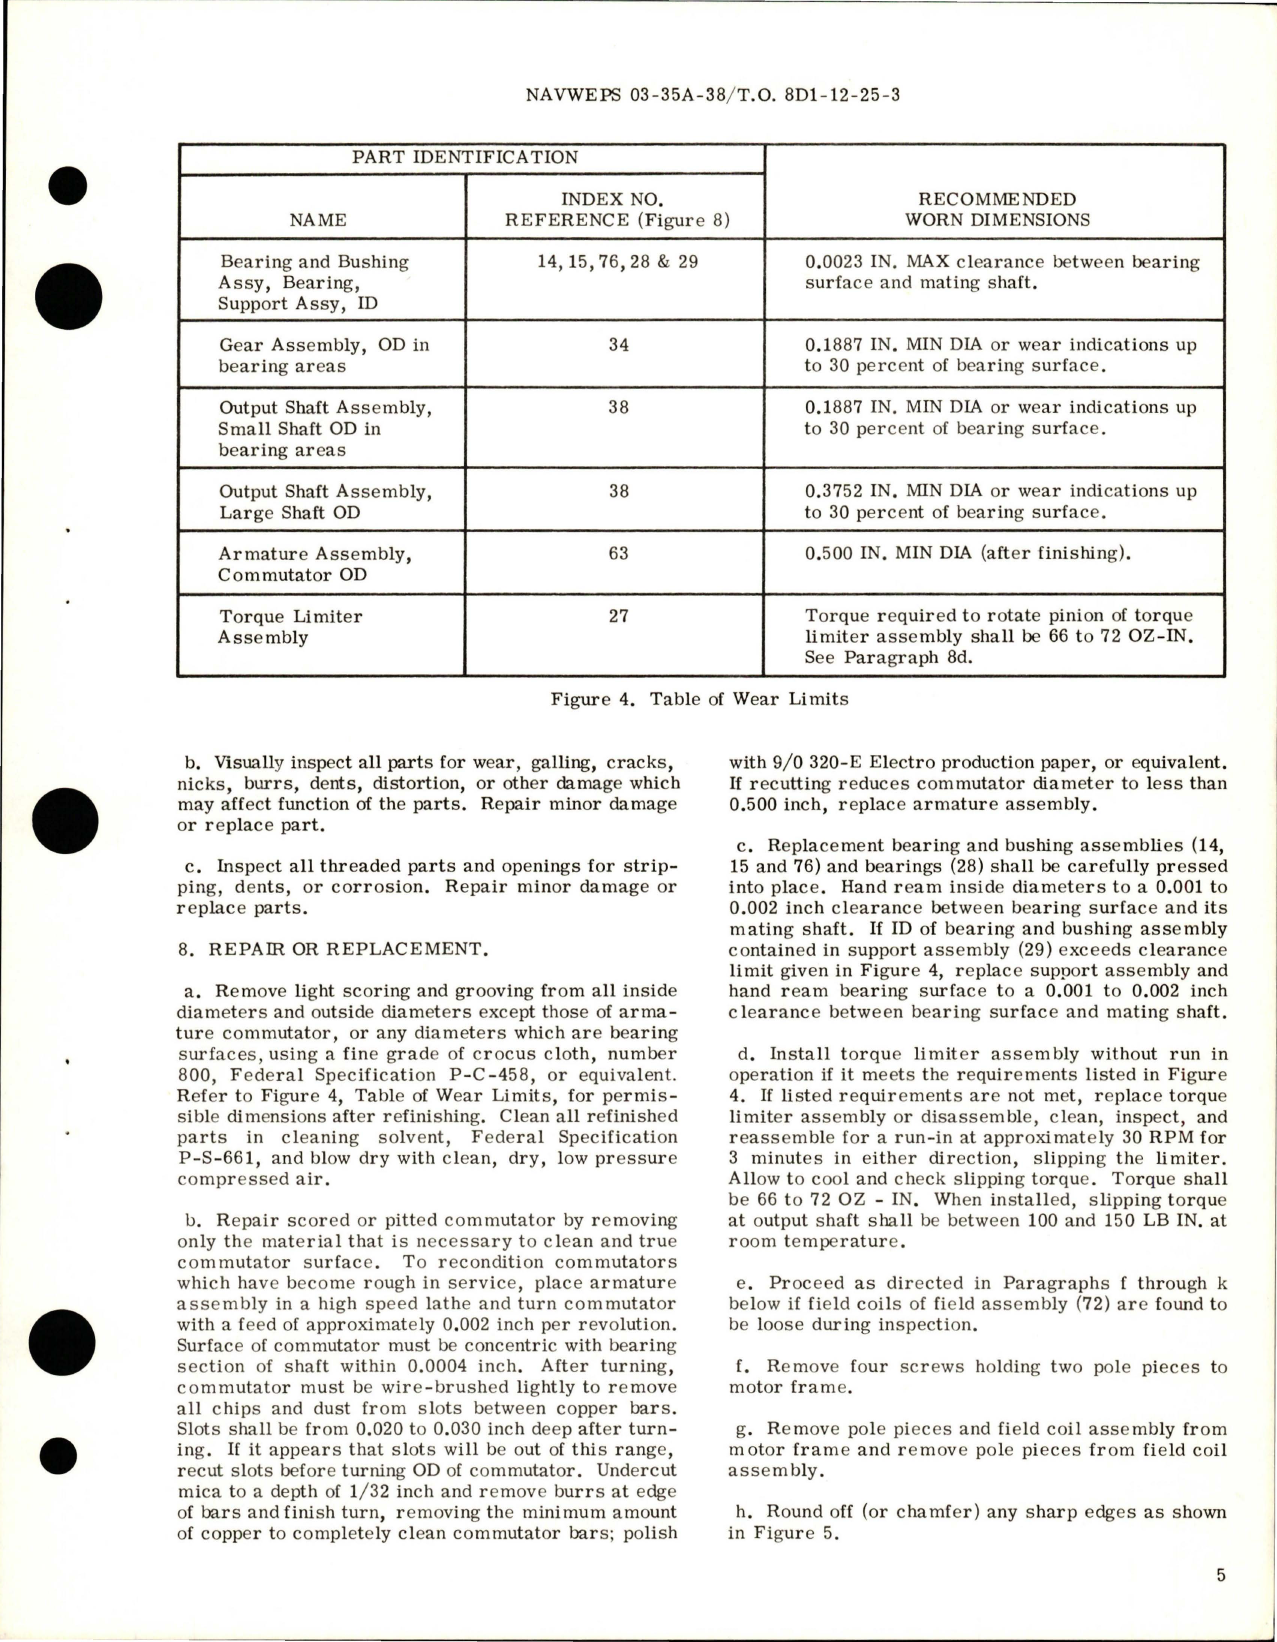 Sample page 5 from AirCorps Library document: Overhaul Instructions with Parts Breakdown for Electro Mechanical Rotary Actuator - Part 1433-633303